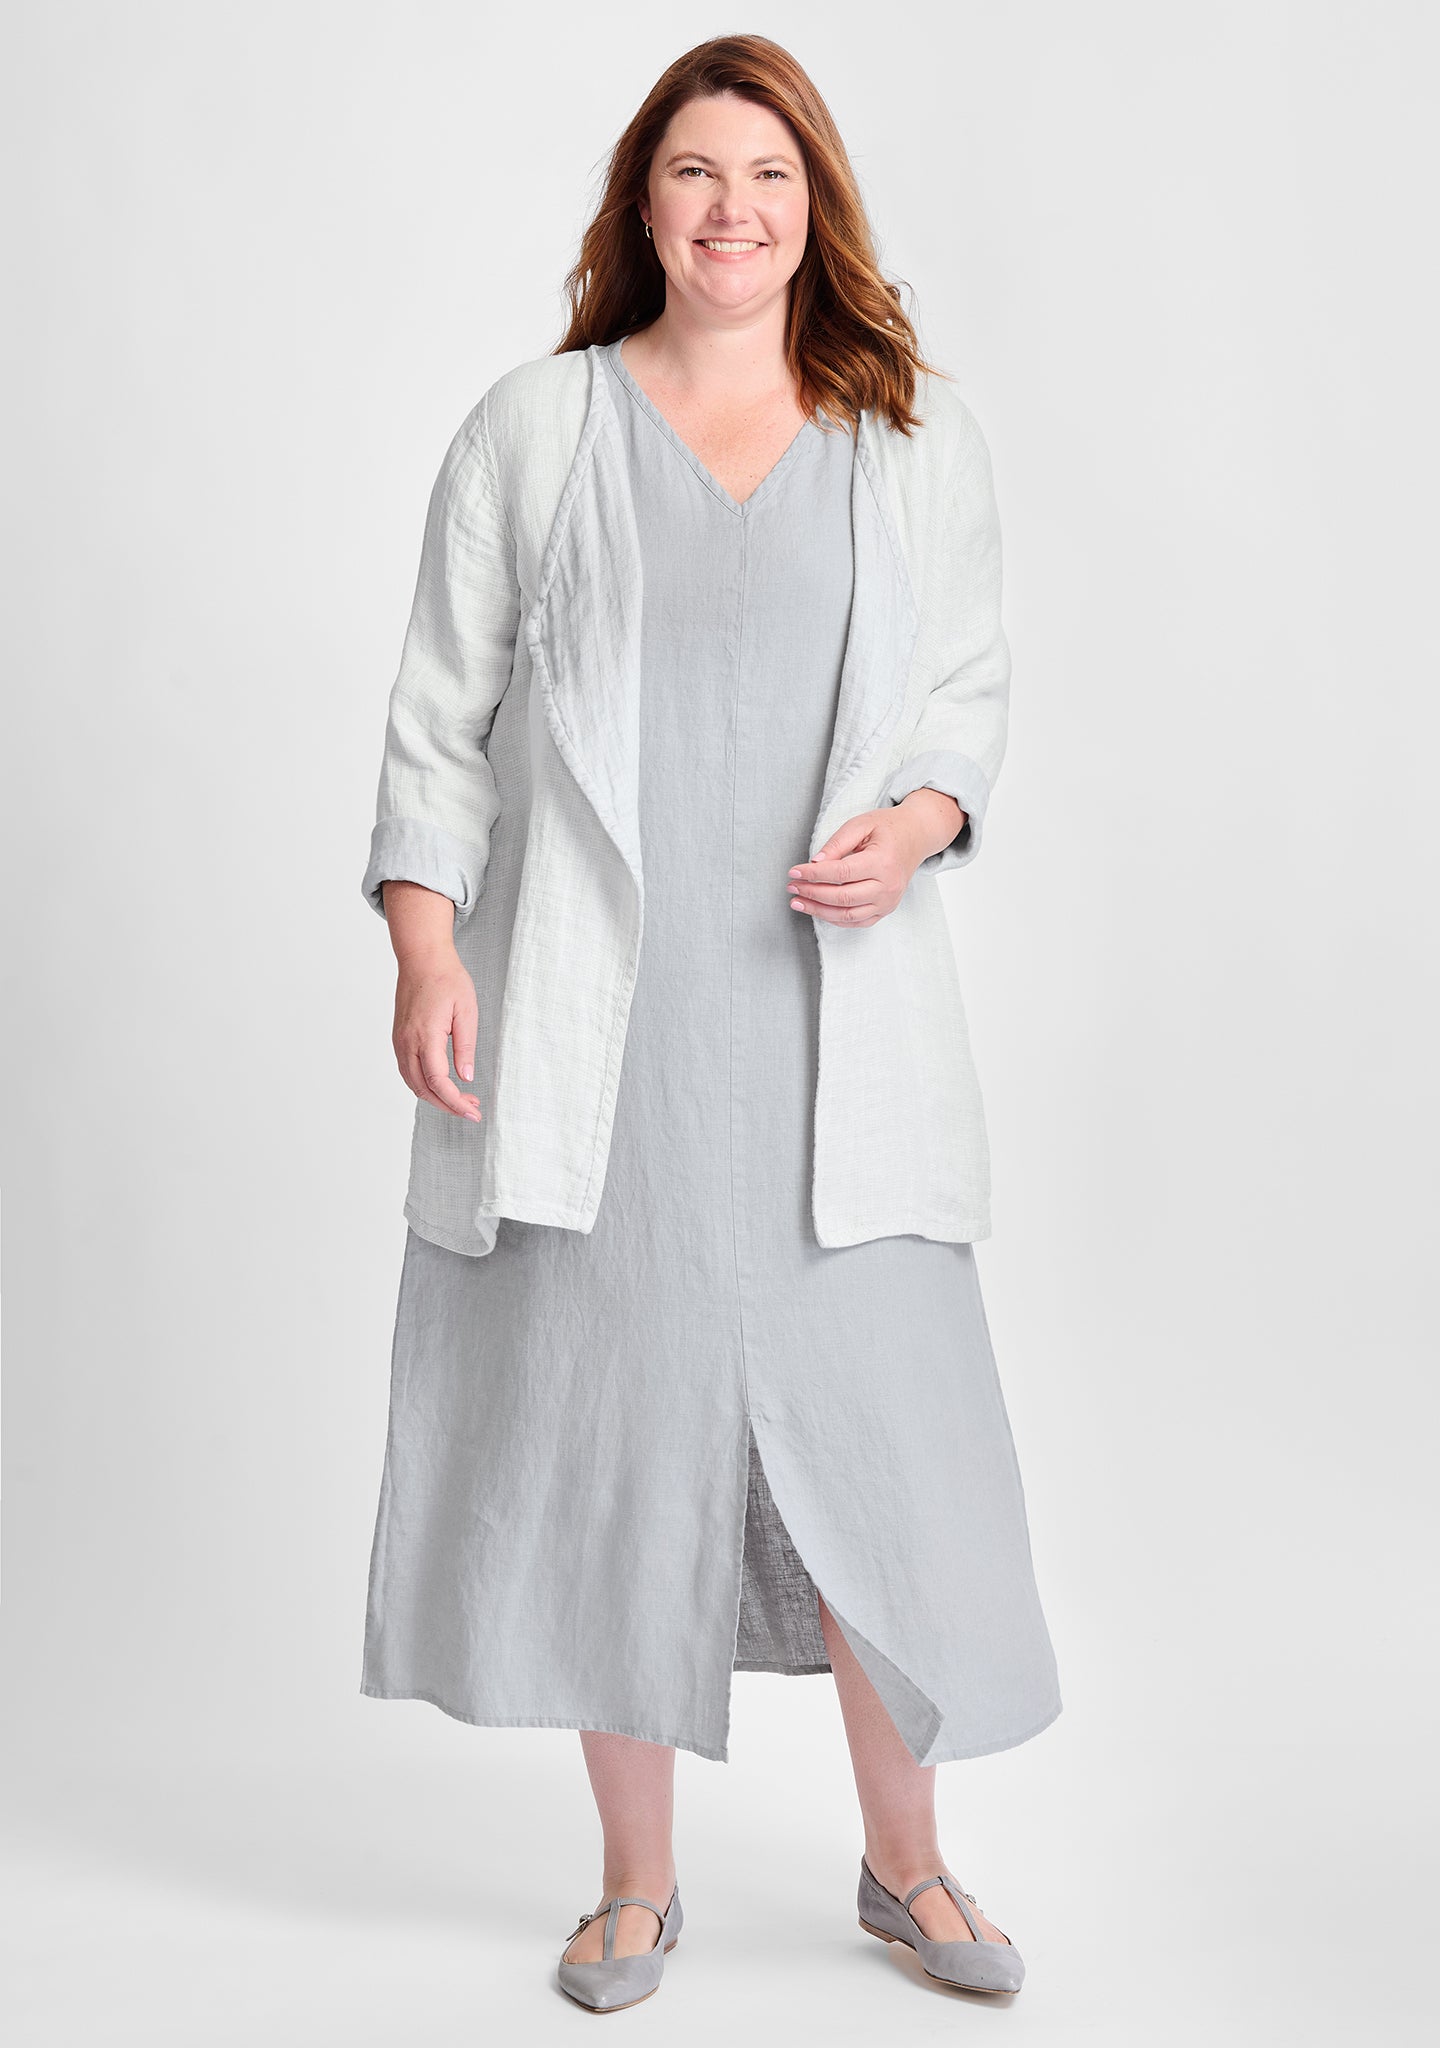 FLAX linen jacket in grey with linen dress in grey